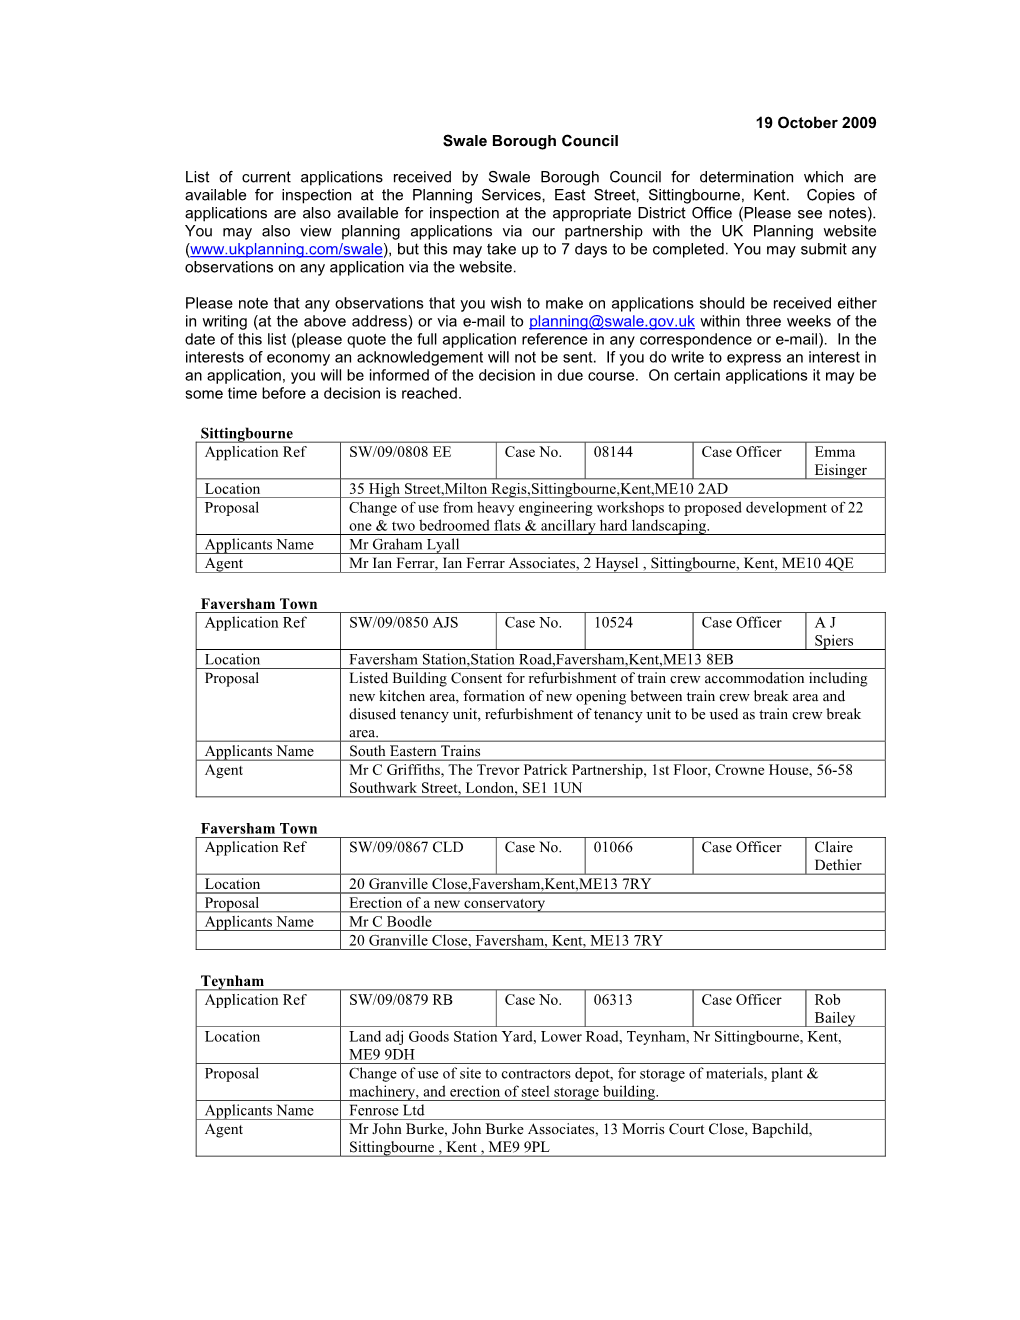 19 October 2009 Swale Borough Council List of Current Applications